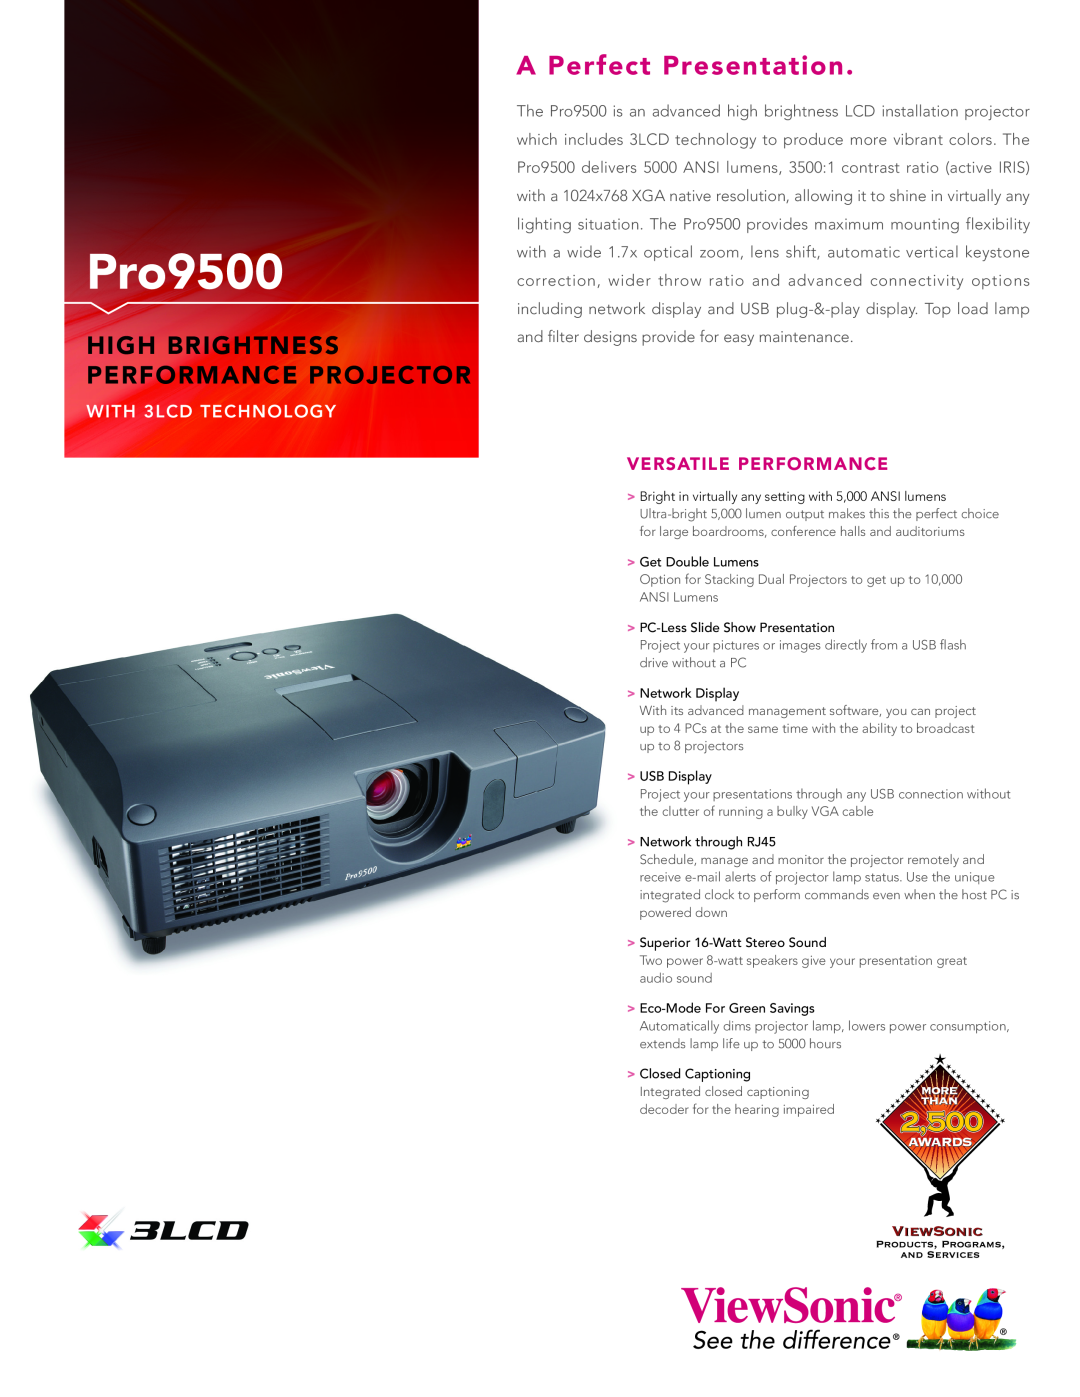 ViewSonic PRO9500 manual Pro9500, A Perfect Presentation, High Brightness Performance Projector, WITH 3LCD TECHNOLOGY 